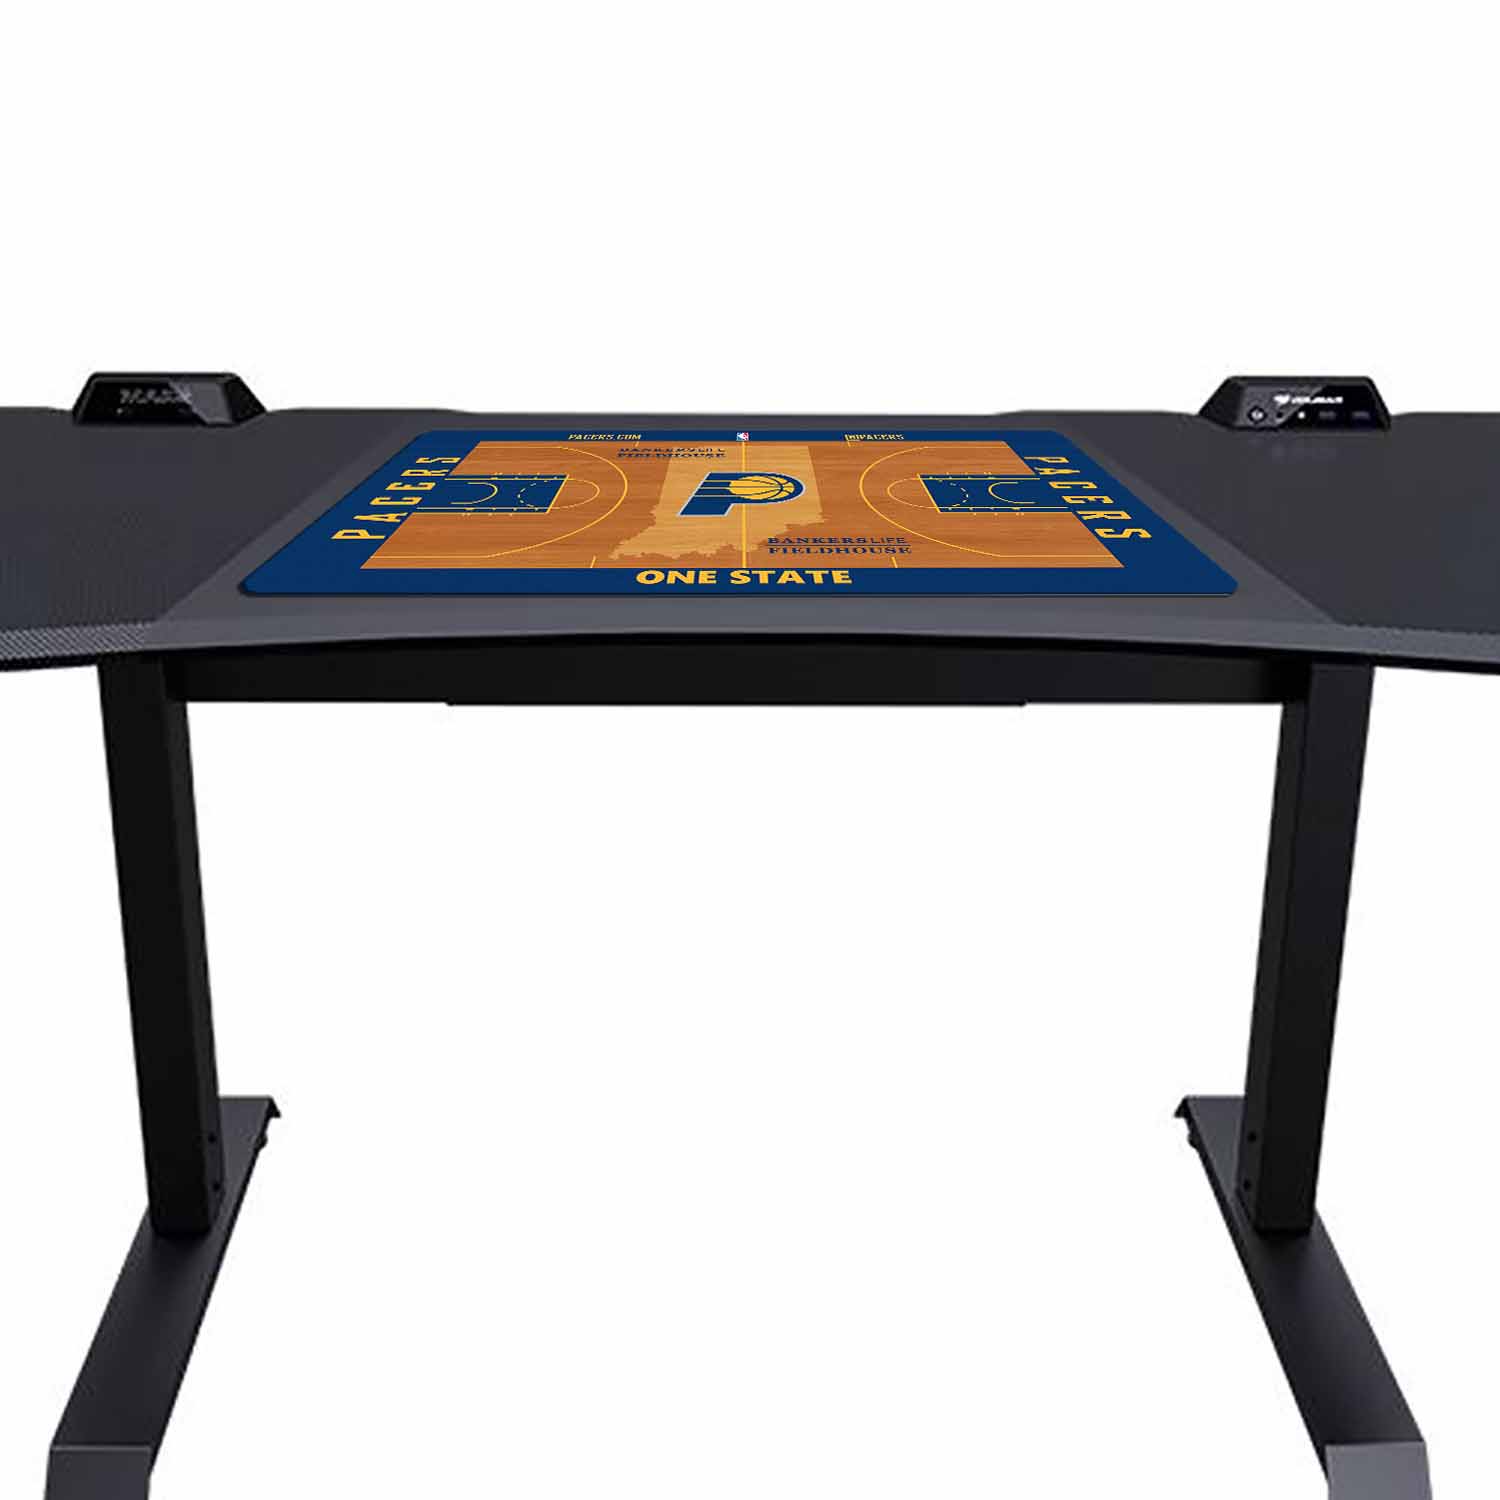 Indiana Pacers Themed NBA Desk / Gamer Pad